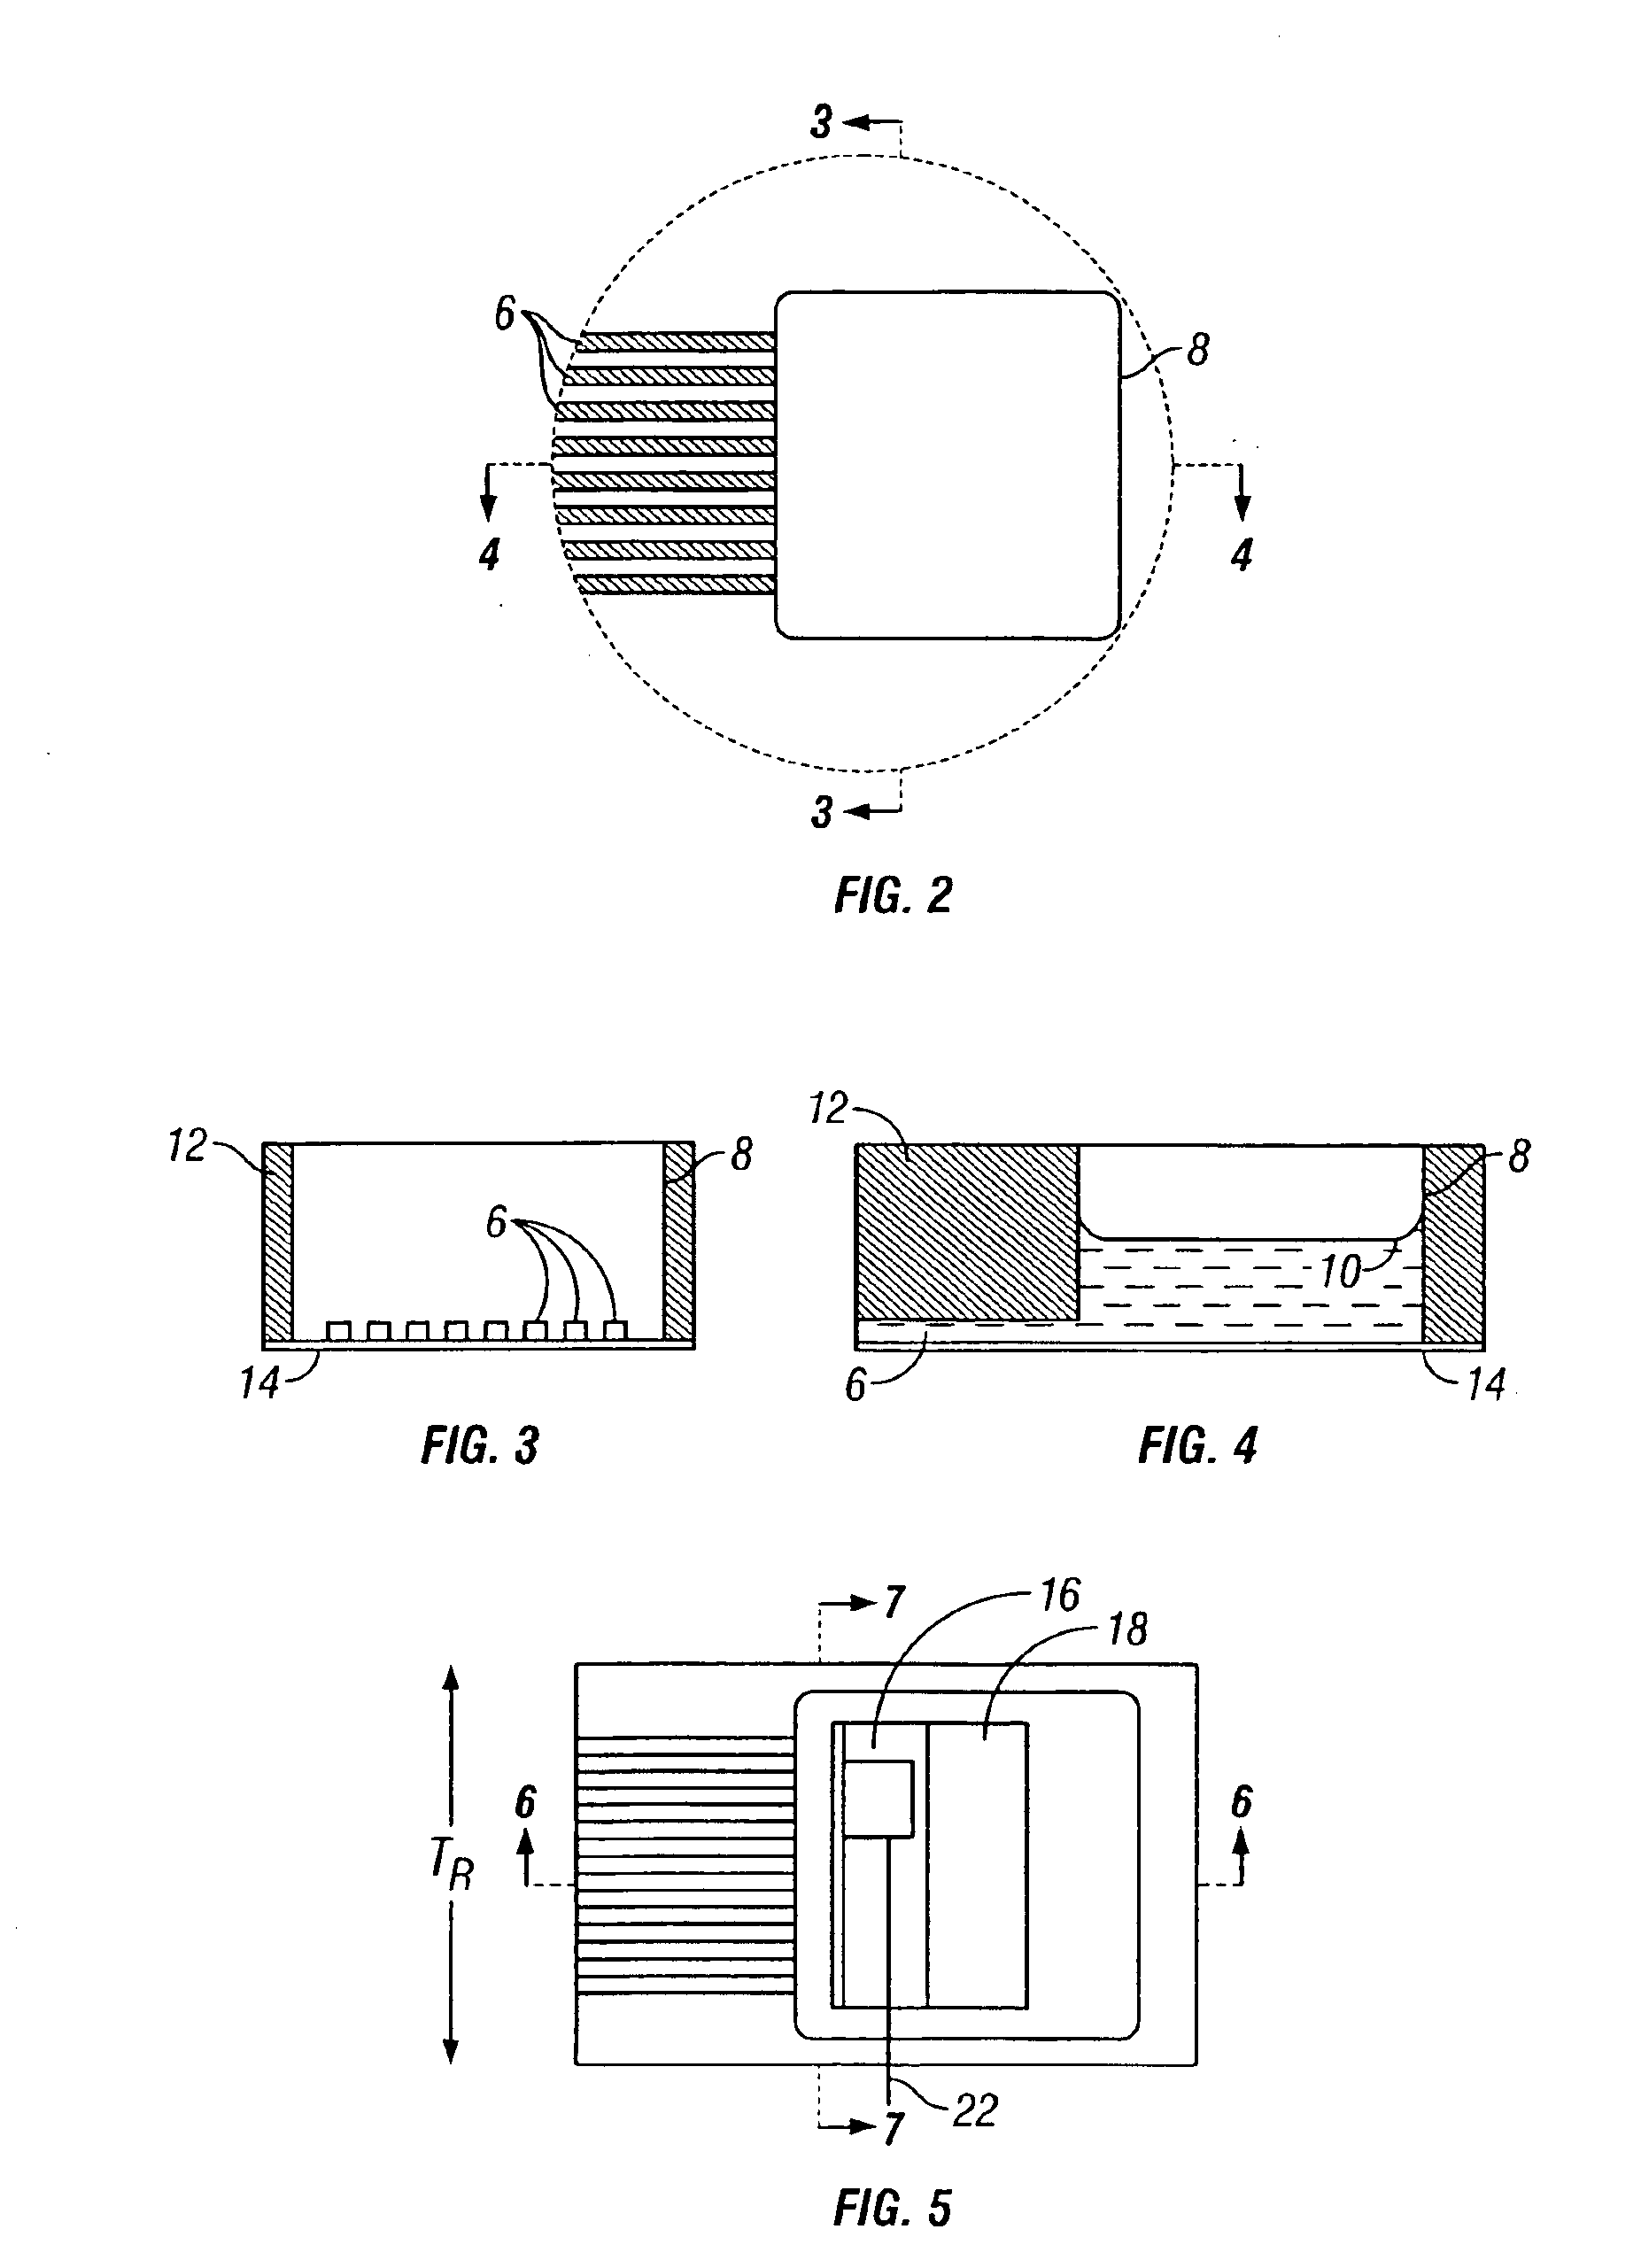 Submersible light-directing member for material excitation in microfluidic devices